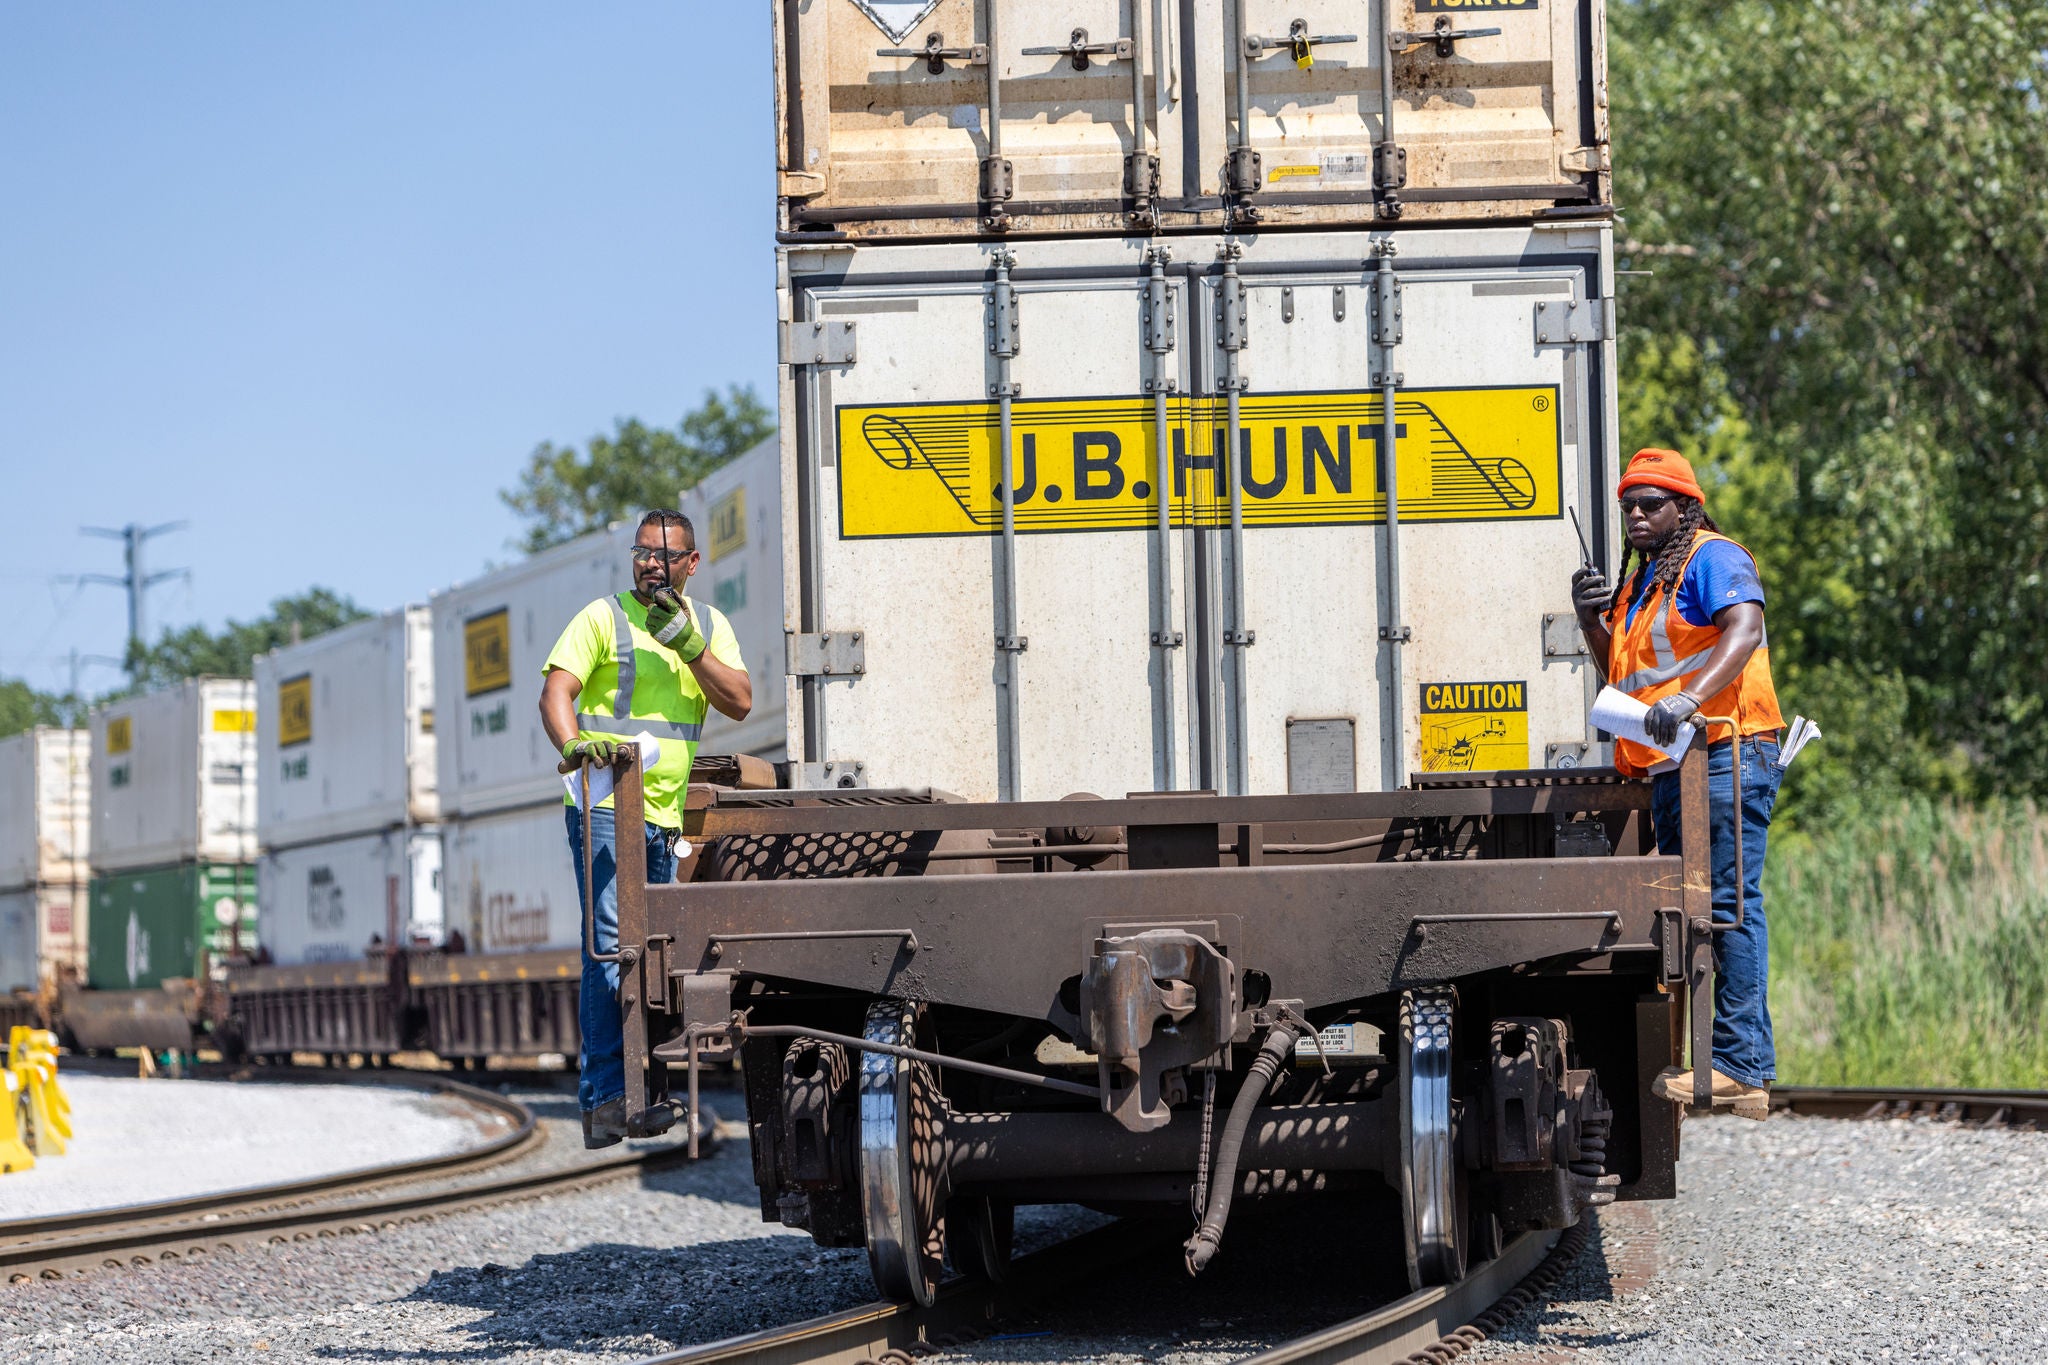 Norfolk Southern craft employees riding train with handheld transceivers in railway jobs